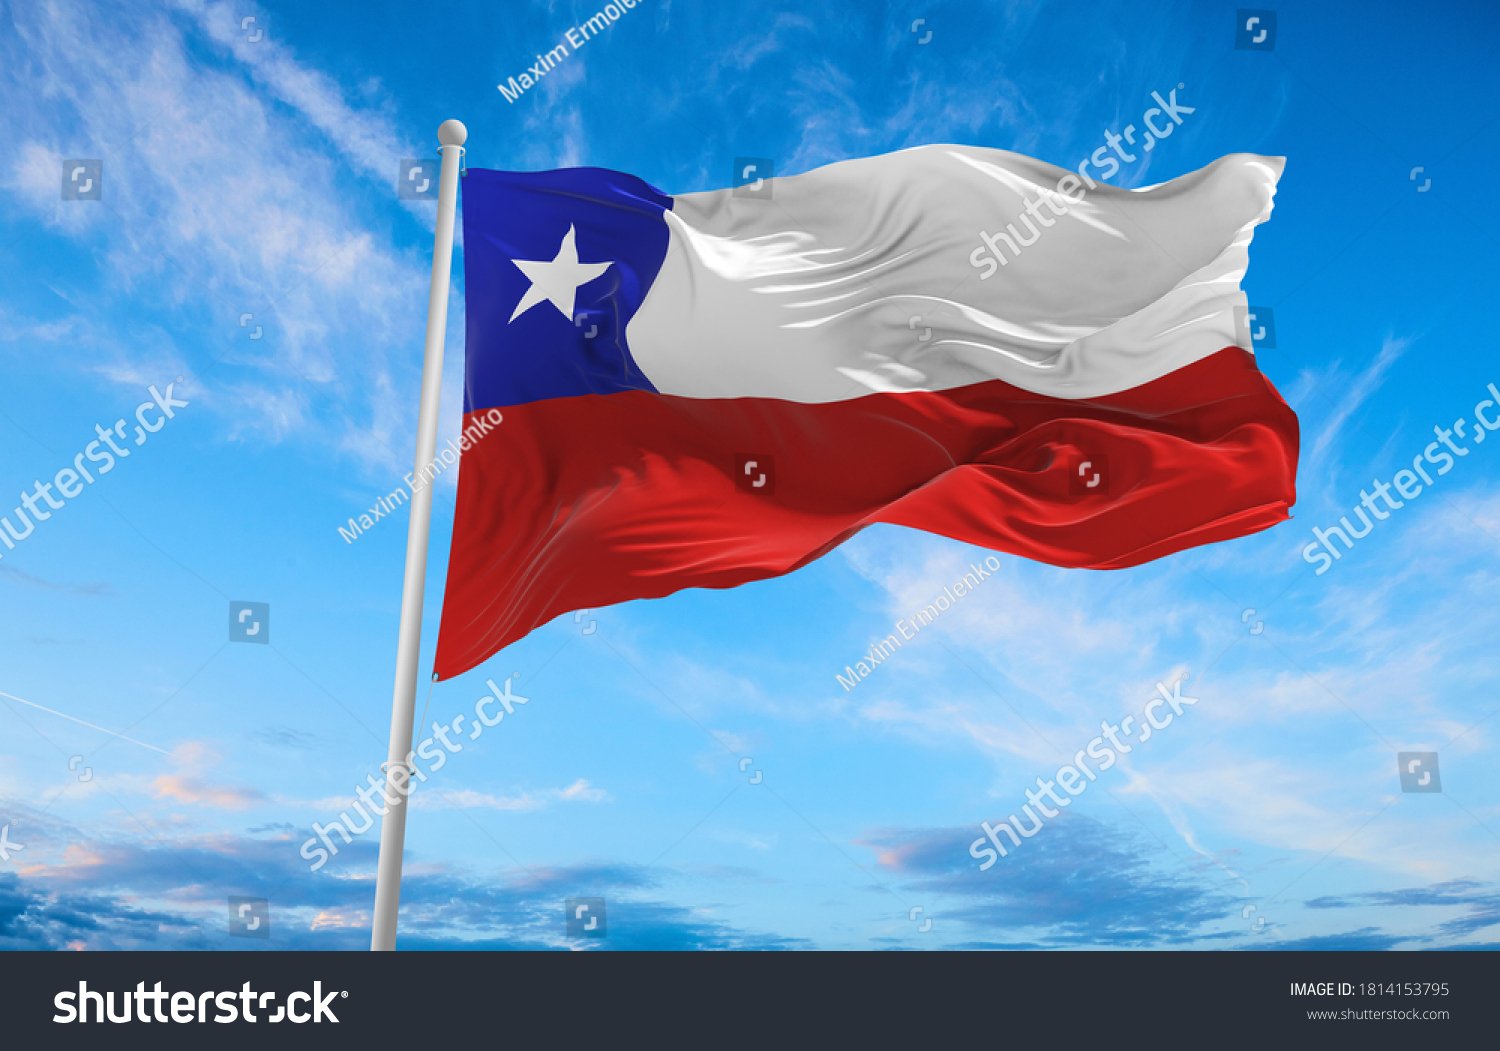 stock-photo-large-chile-flag-waving-in-the-wind-1814153795